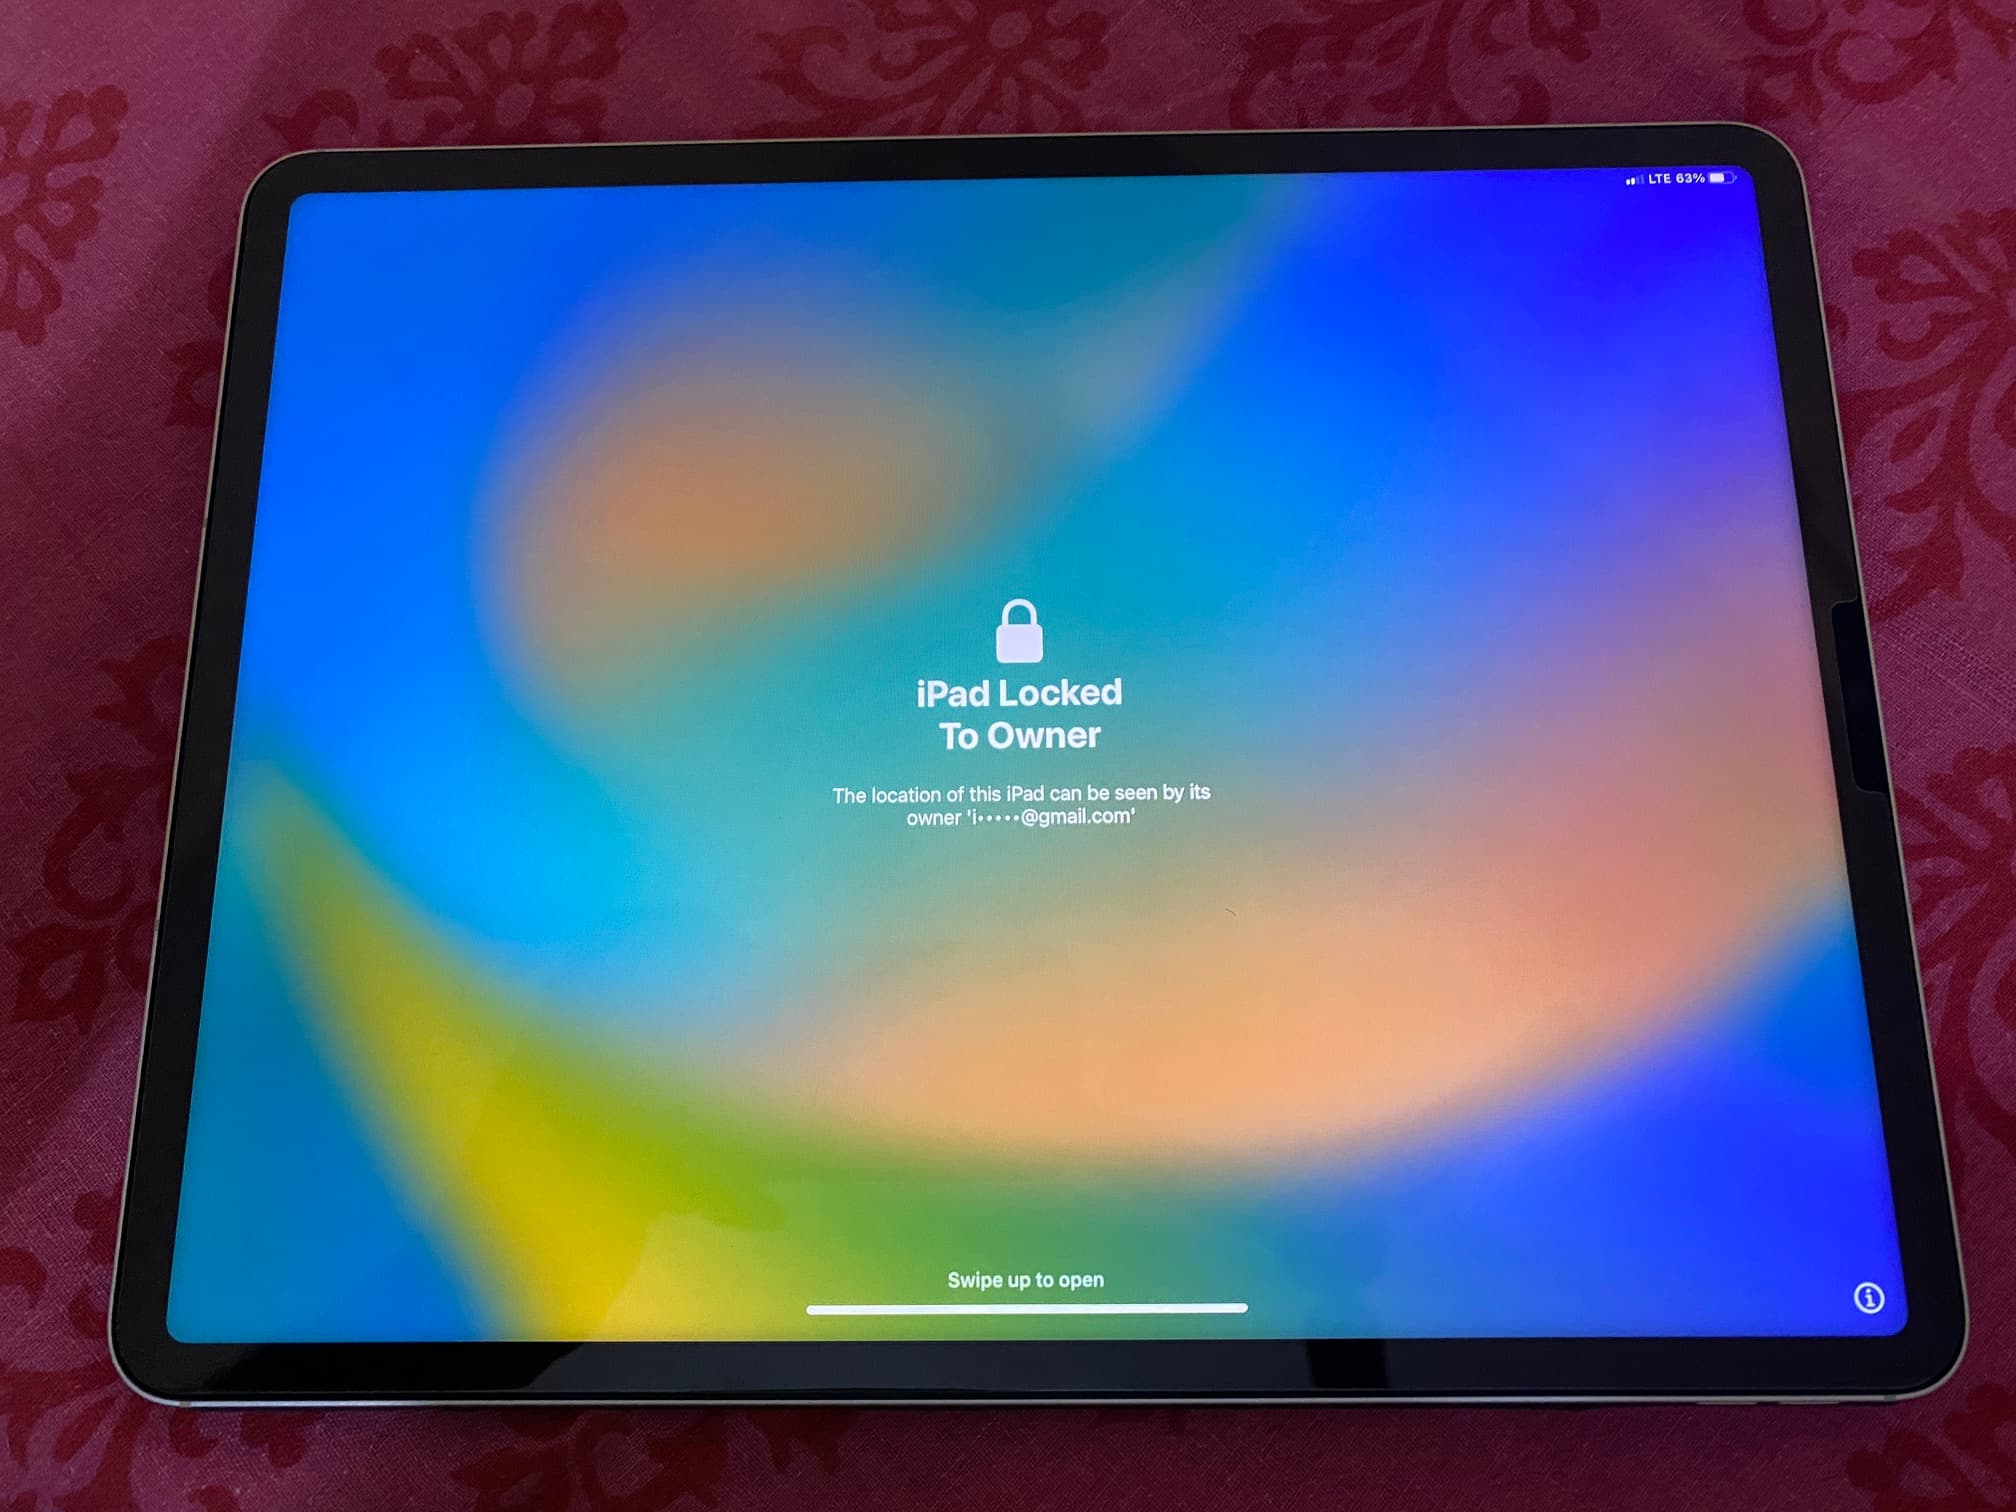 iPad Locked To Owner message on erased device due to Activation Lock